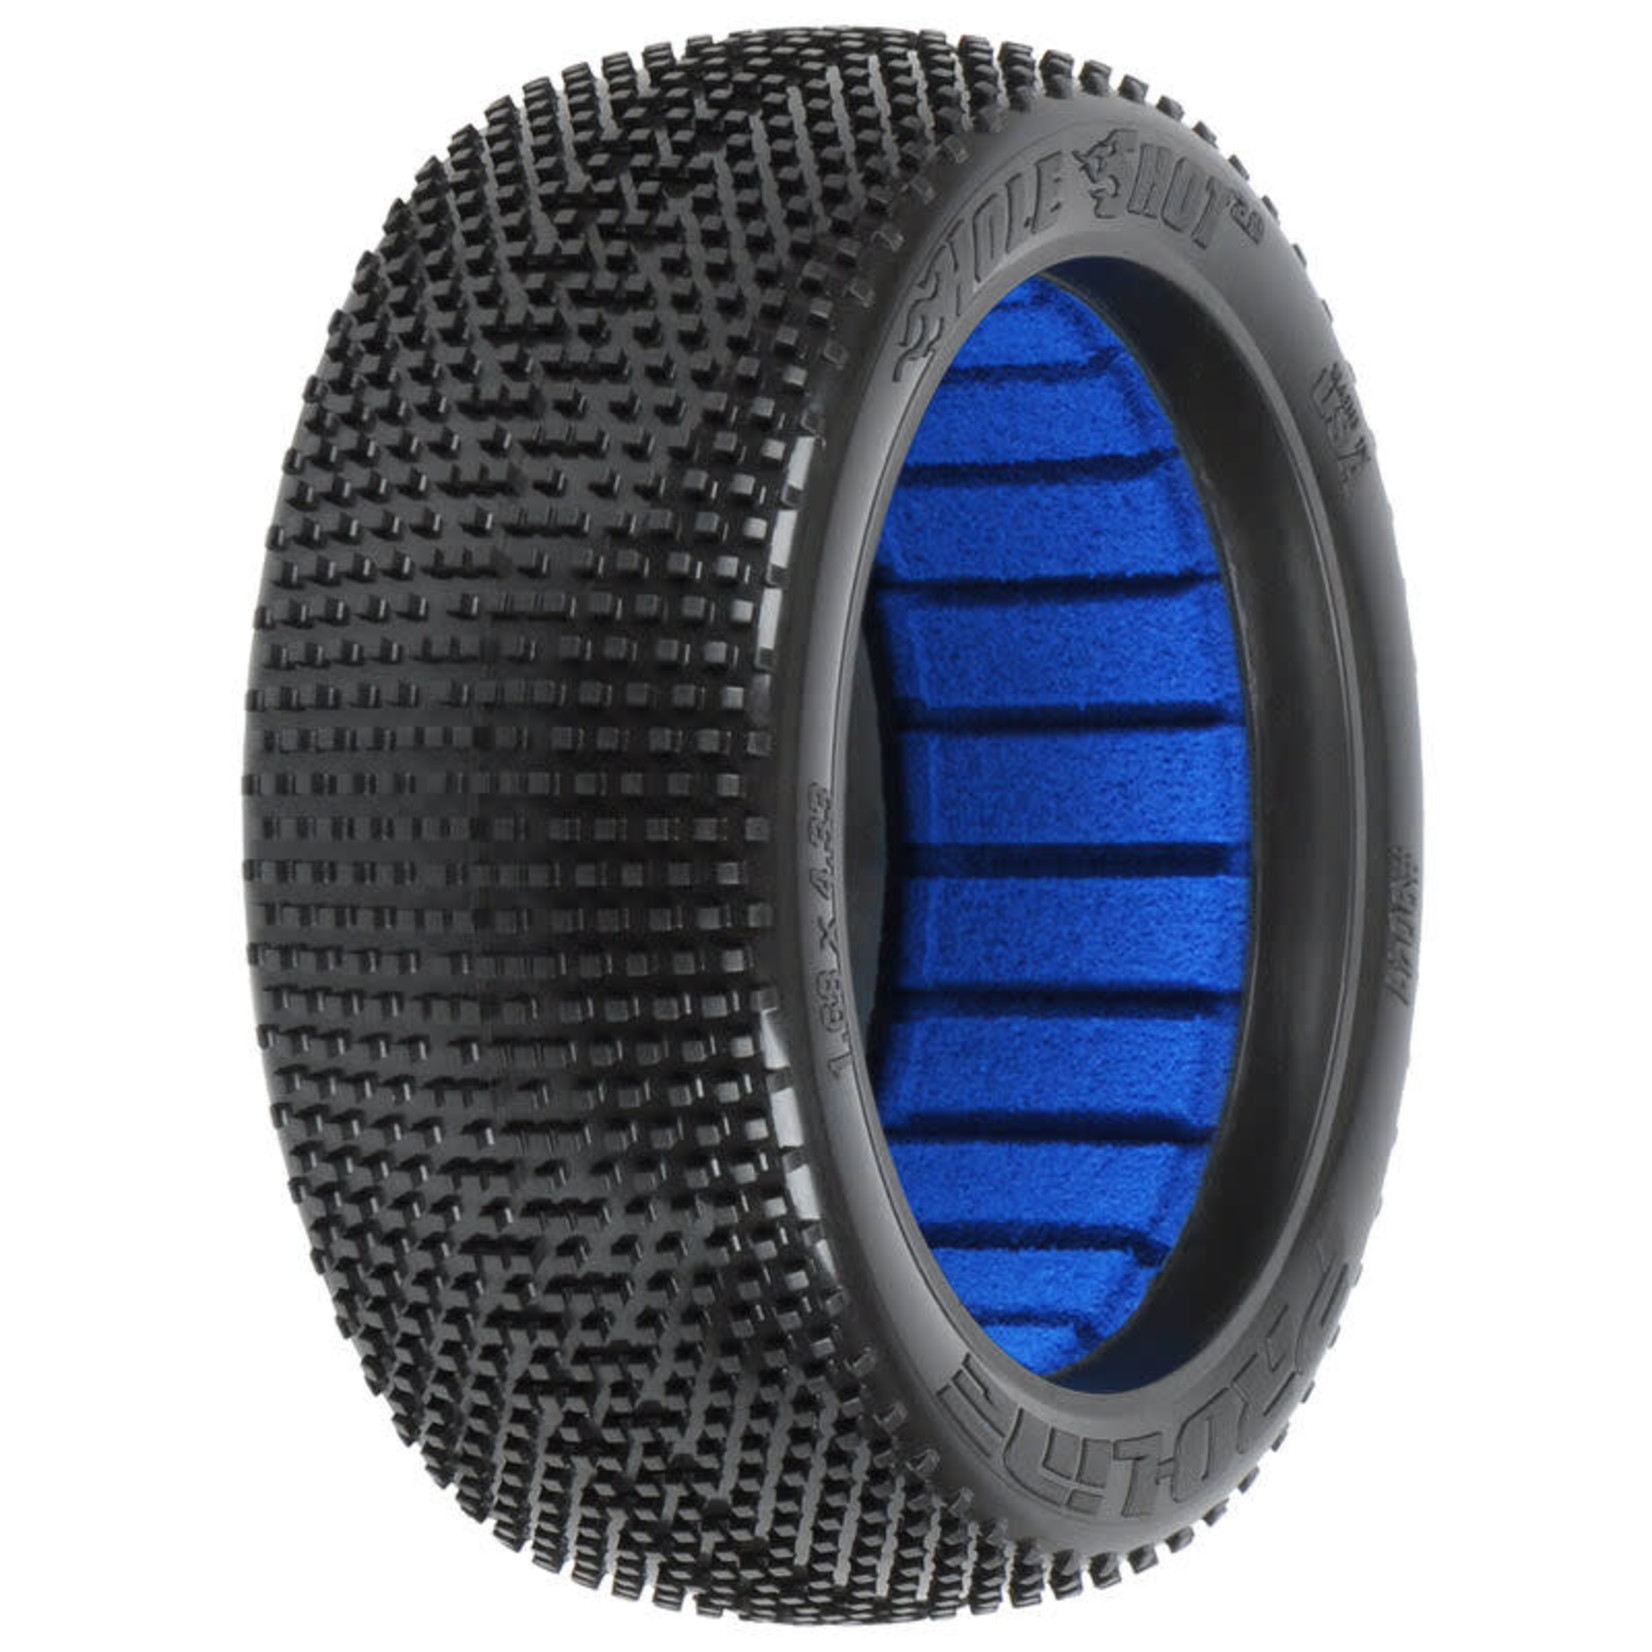 Pro-line Racing PRO9041203 Pro-Line 1/8 Hole Shot 2.0 S3 Soft Off-Road Tire:Buggy(2)